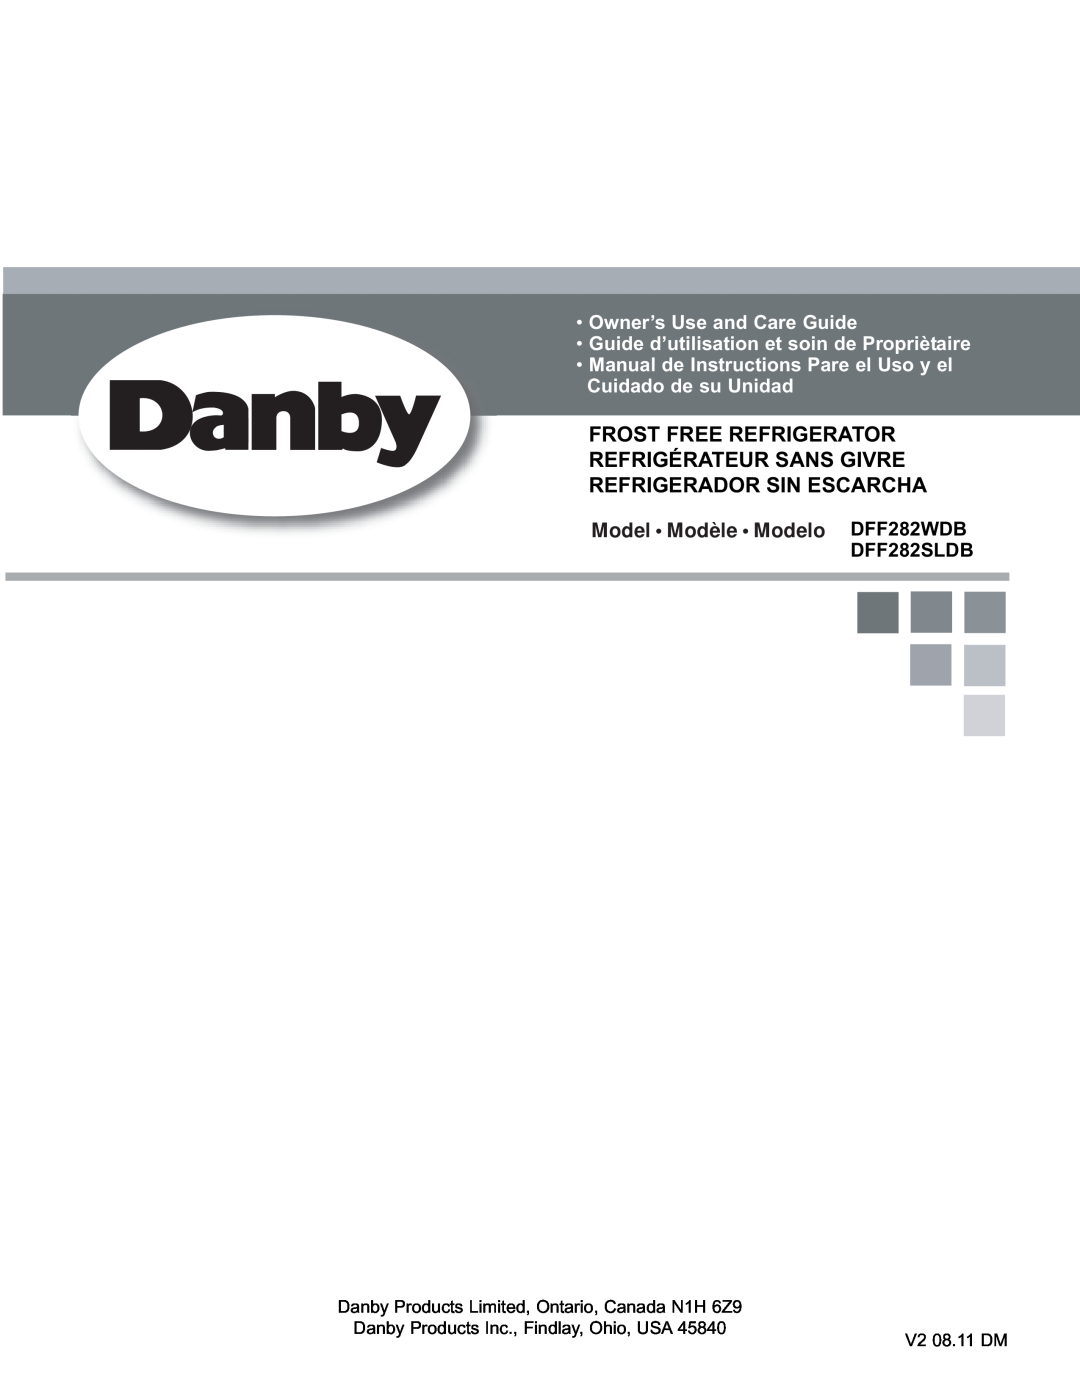 Danby DFF282SLDB manual Model Modèle Modelo DFF282WDB, Owner’s Use and Care Guide 